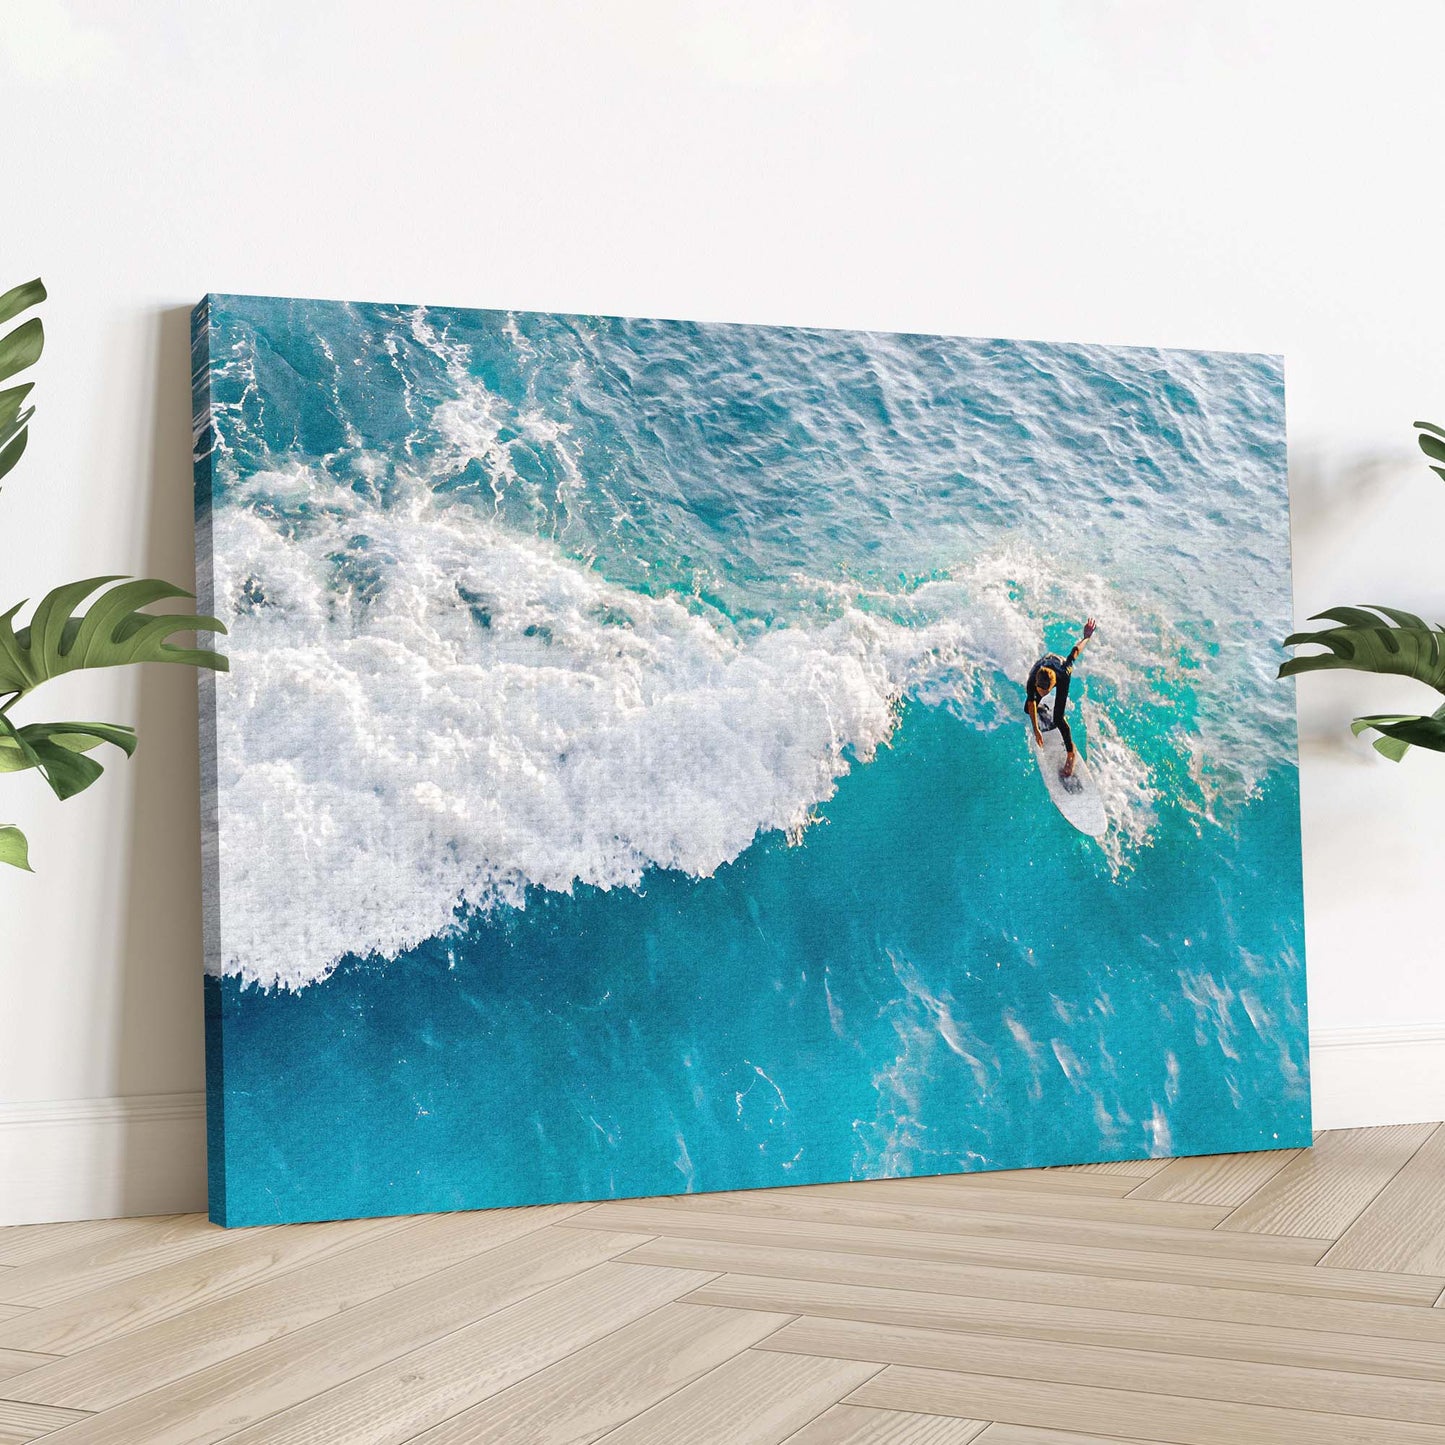 Surfing Crest Wave Canvas Wall Art Style 2 - Image by Tailored Canvases